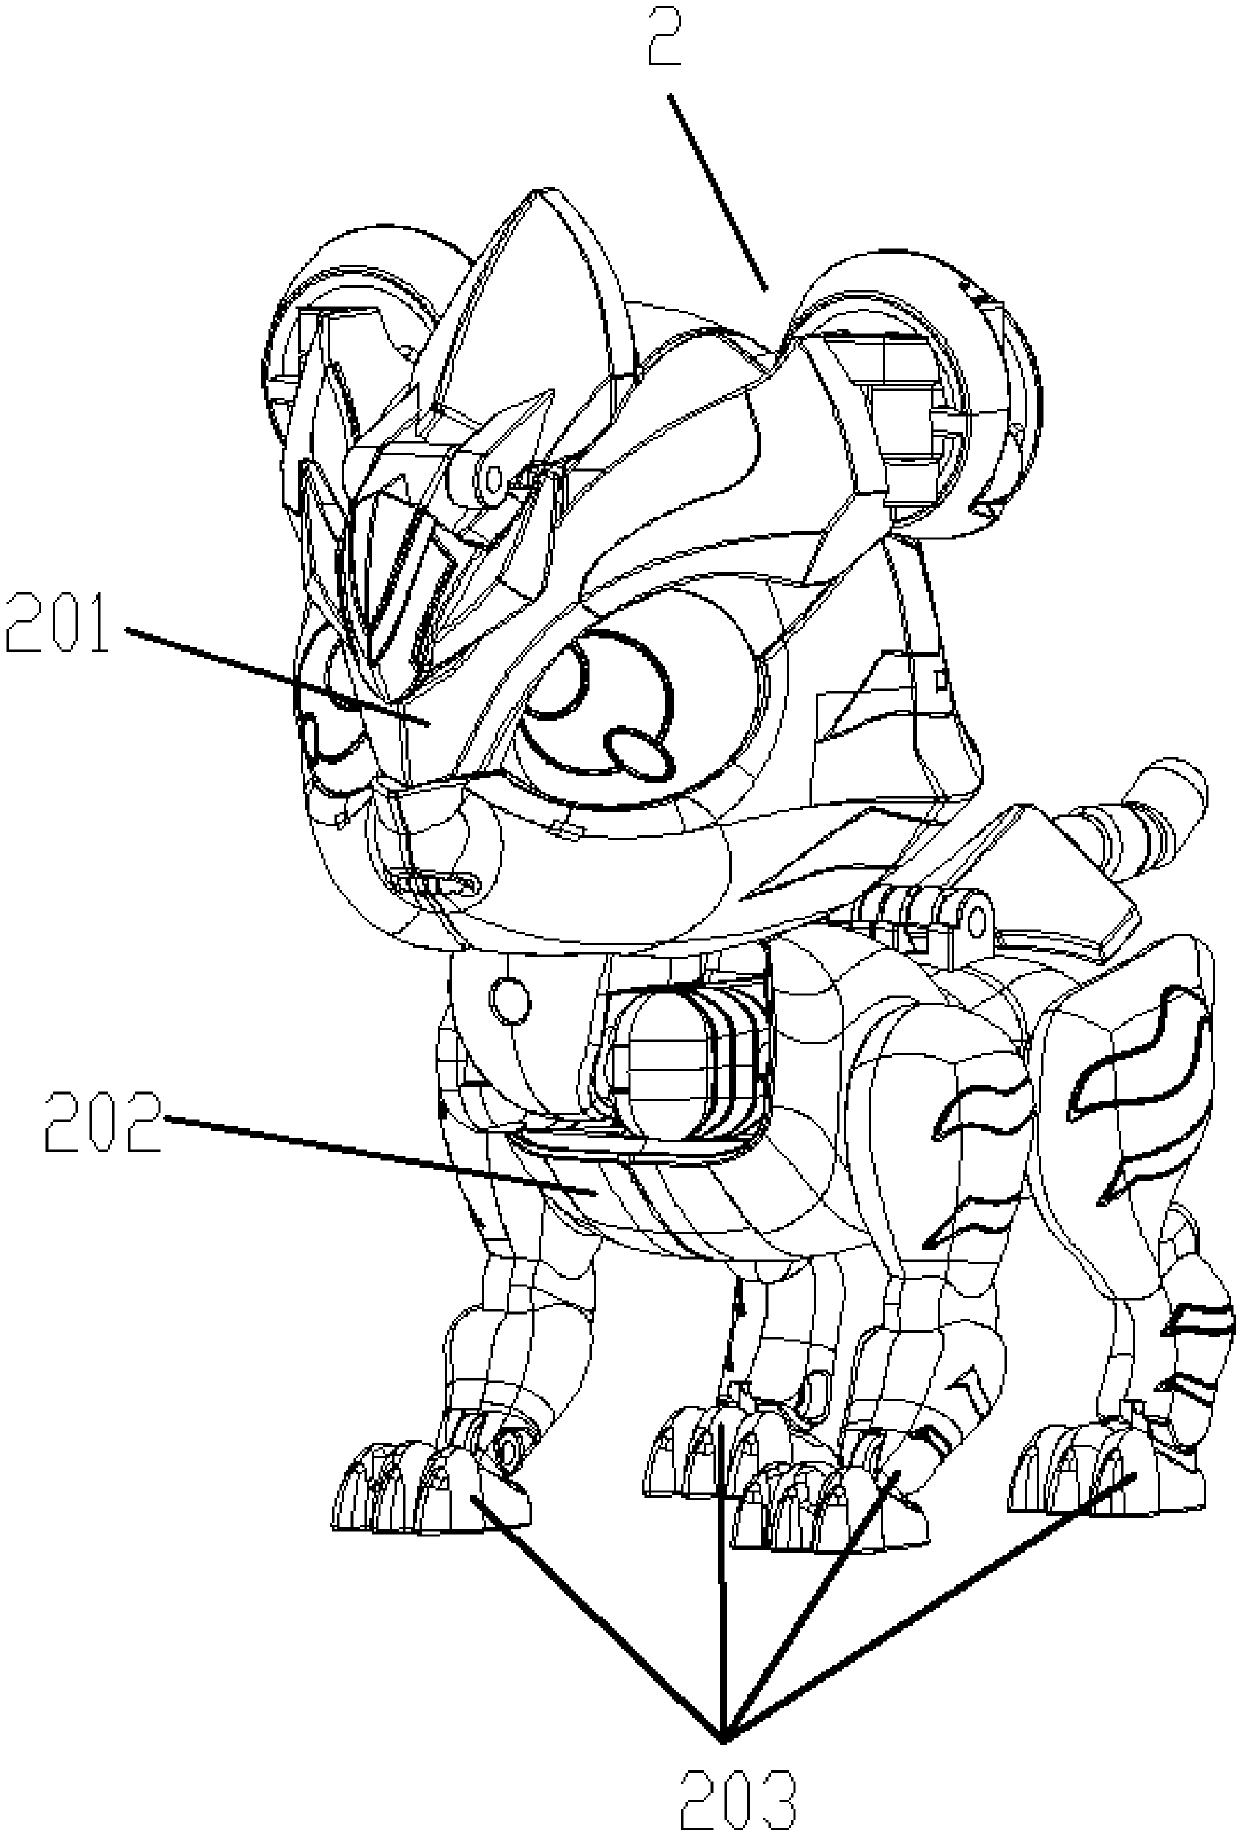 Combined deformation toy